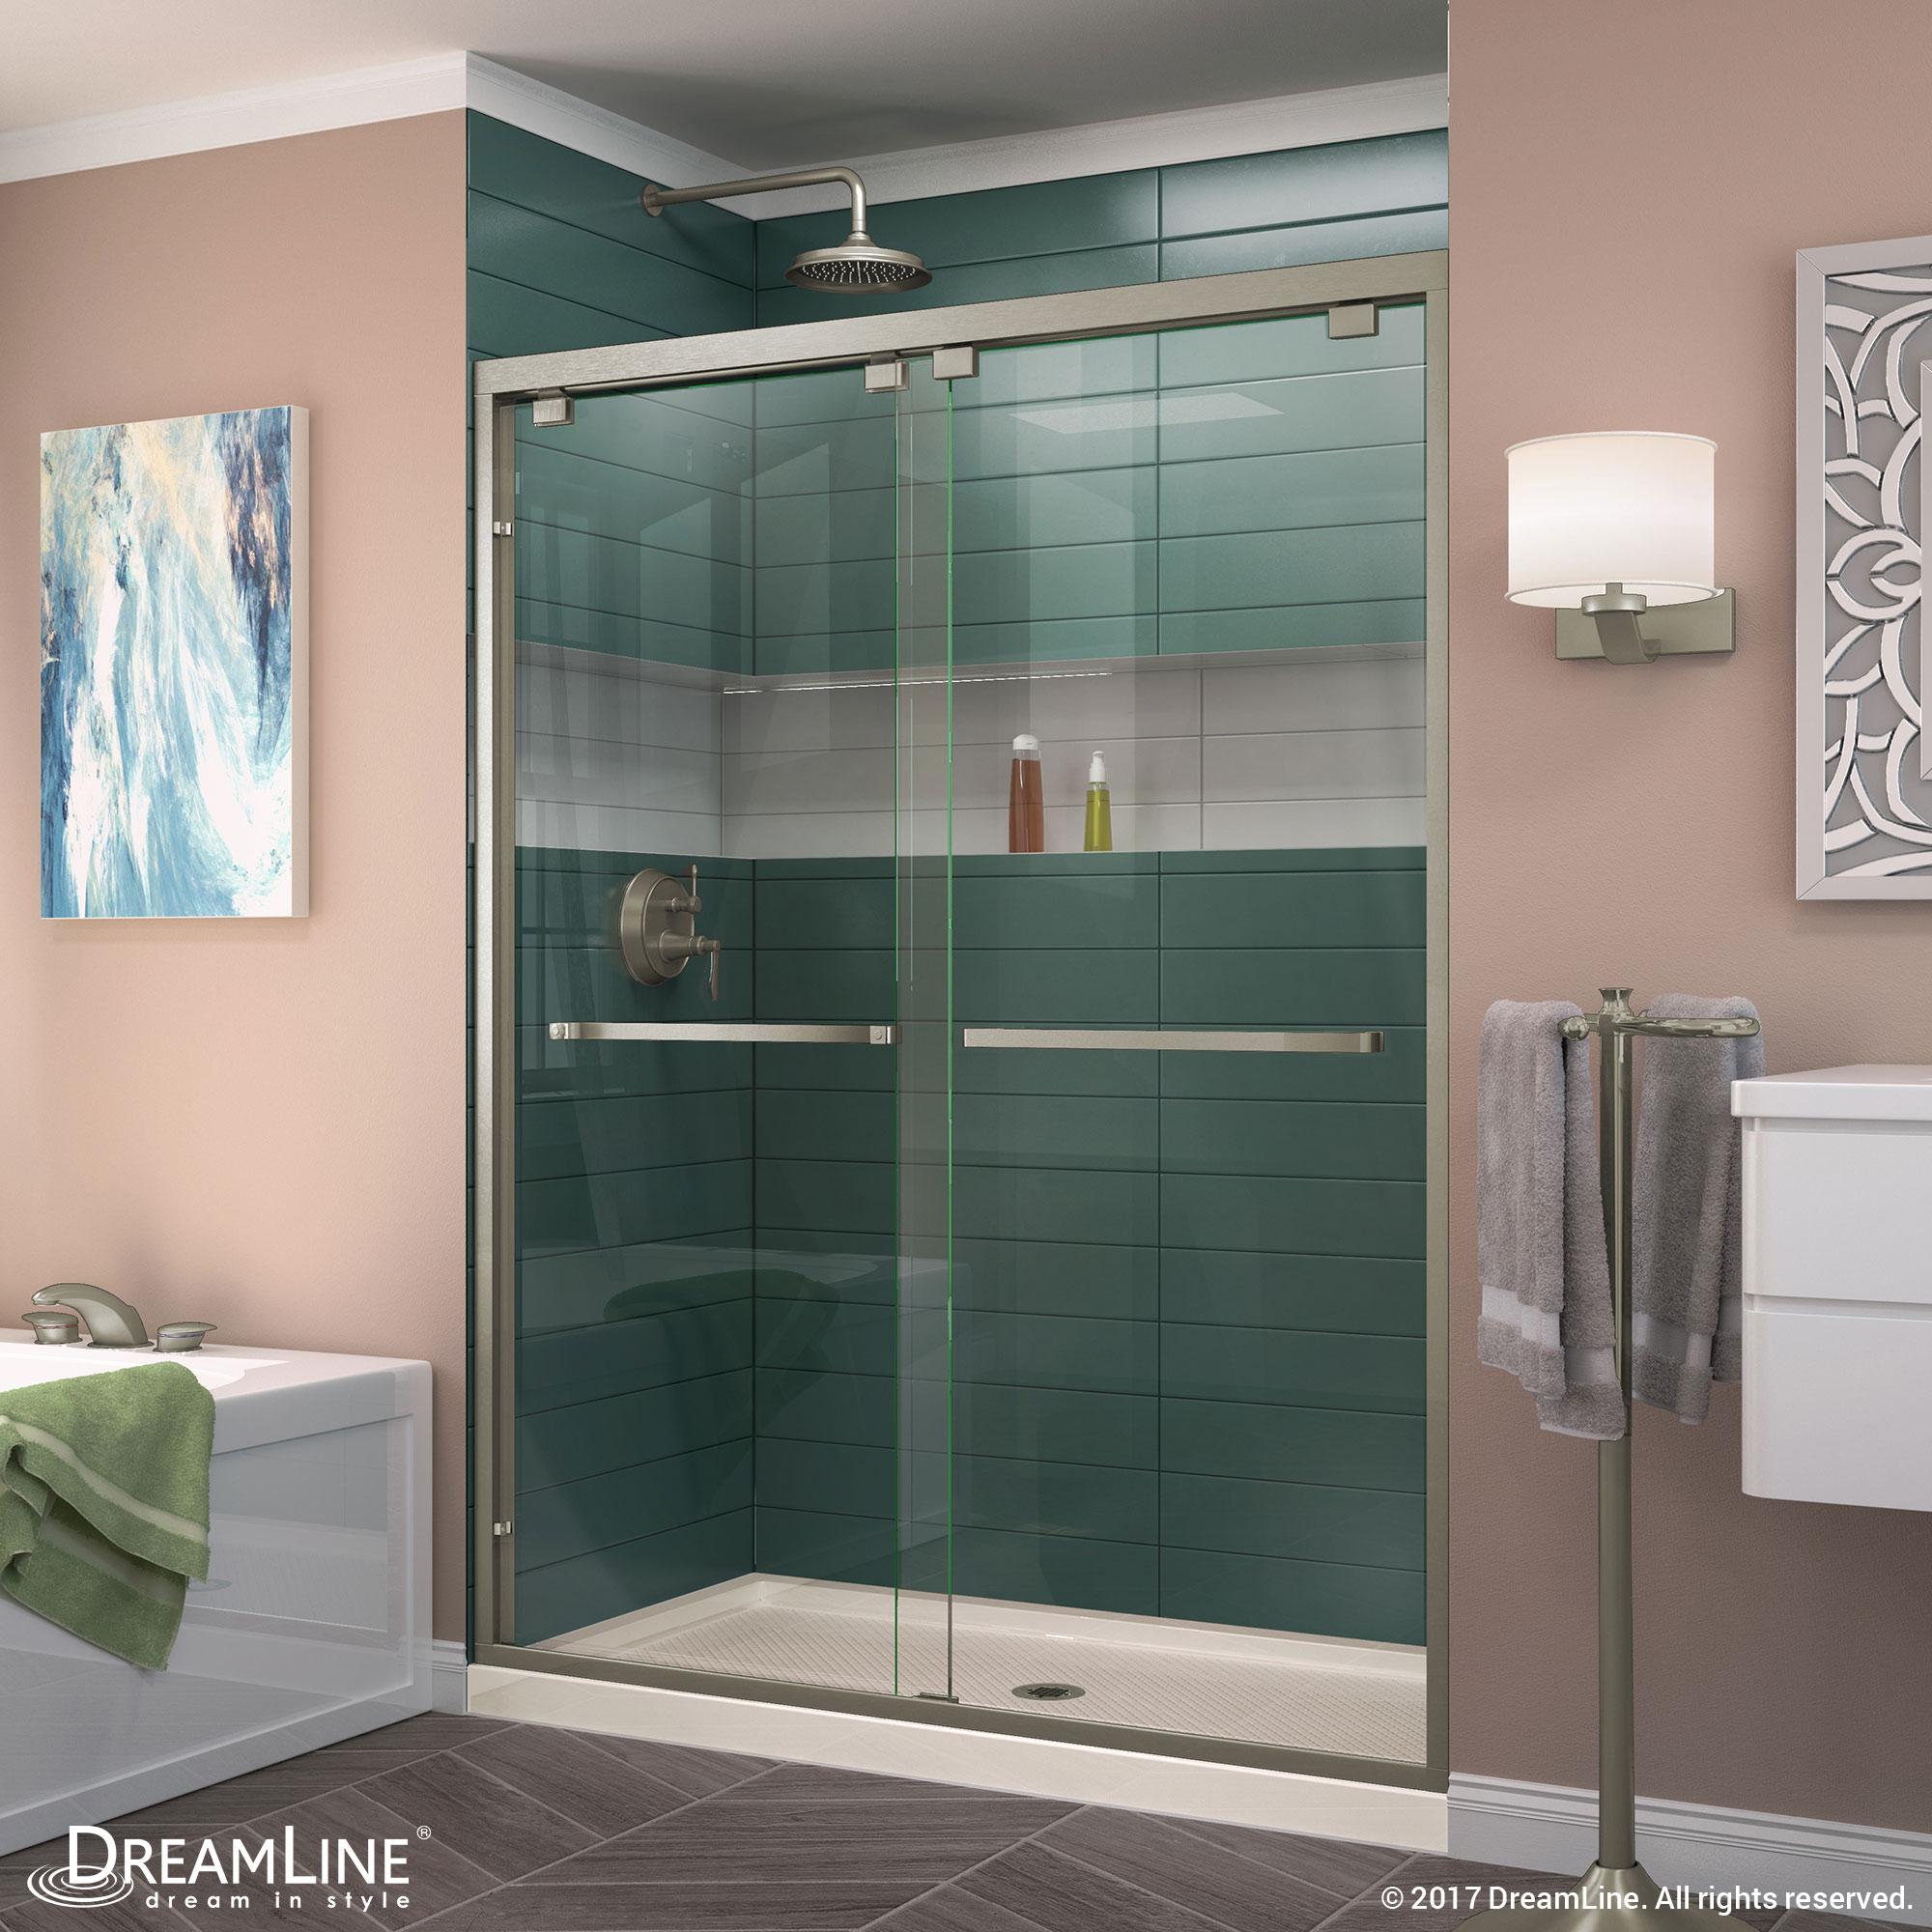 DreamLine Encore 32 in. D x 60 in. W x 78 3/4 in. H Bypass Shower Door in Chrome and Center Drain Black Base Kit